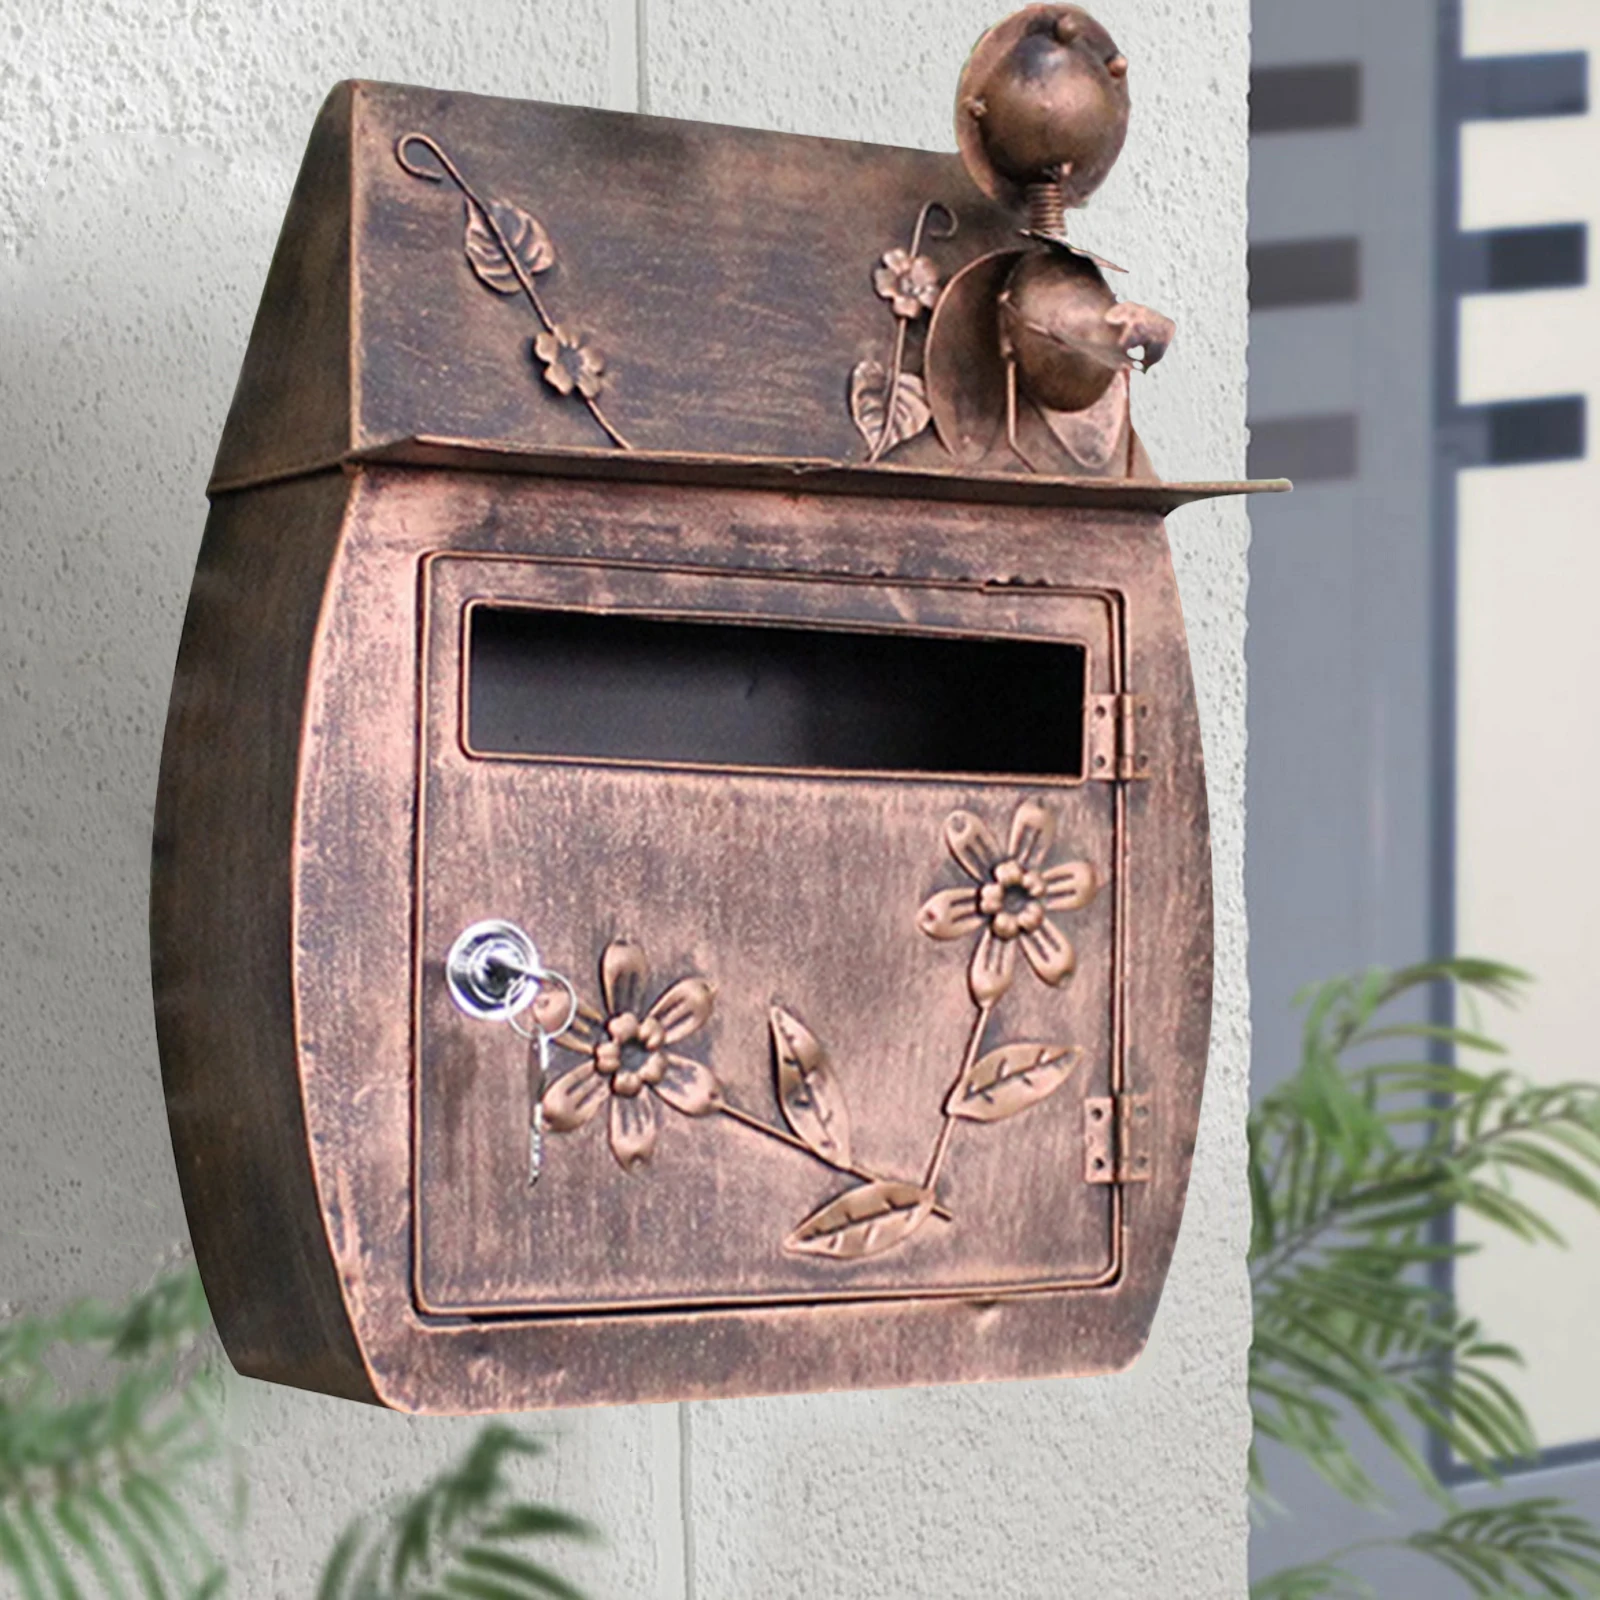 Vintage Pastoral Outdoor Iron Mailbox Lockable Wall Mounted Post Box Key Mailbox Rainproof Letterbox for Outdoor Garden Decor